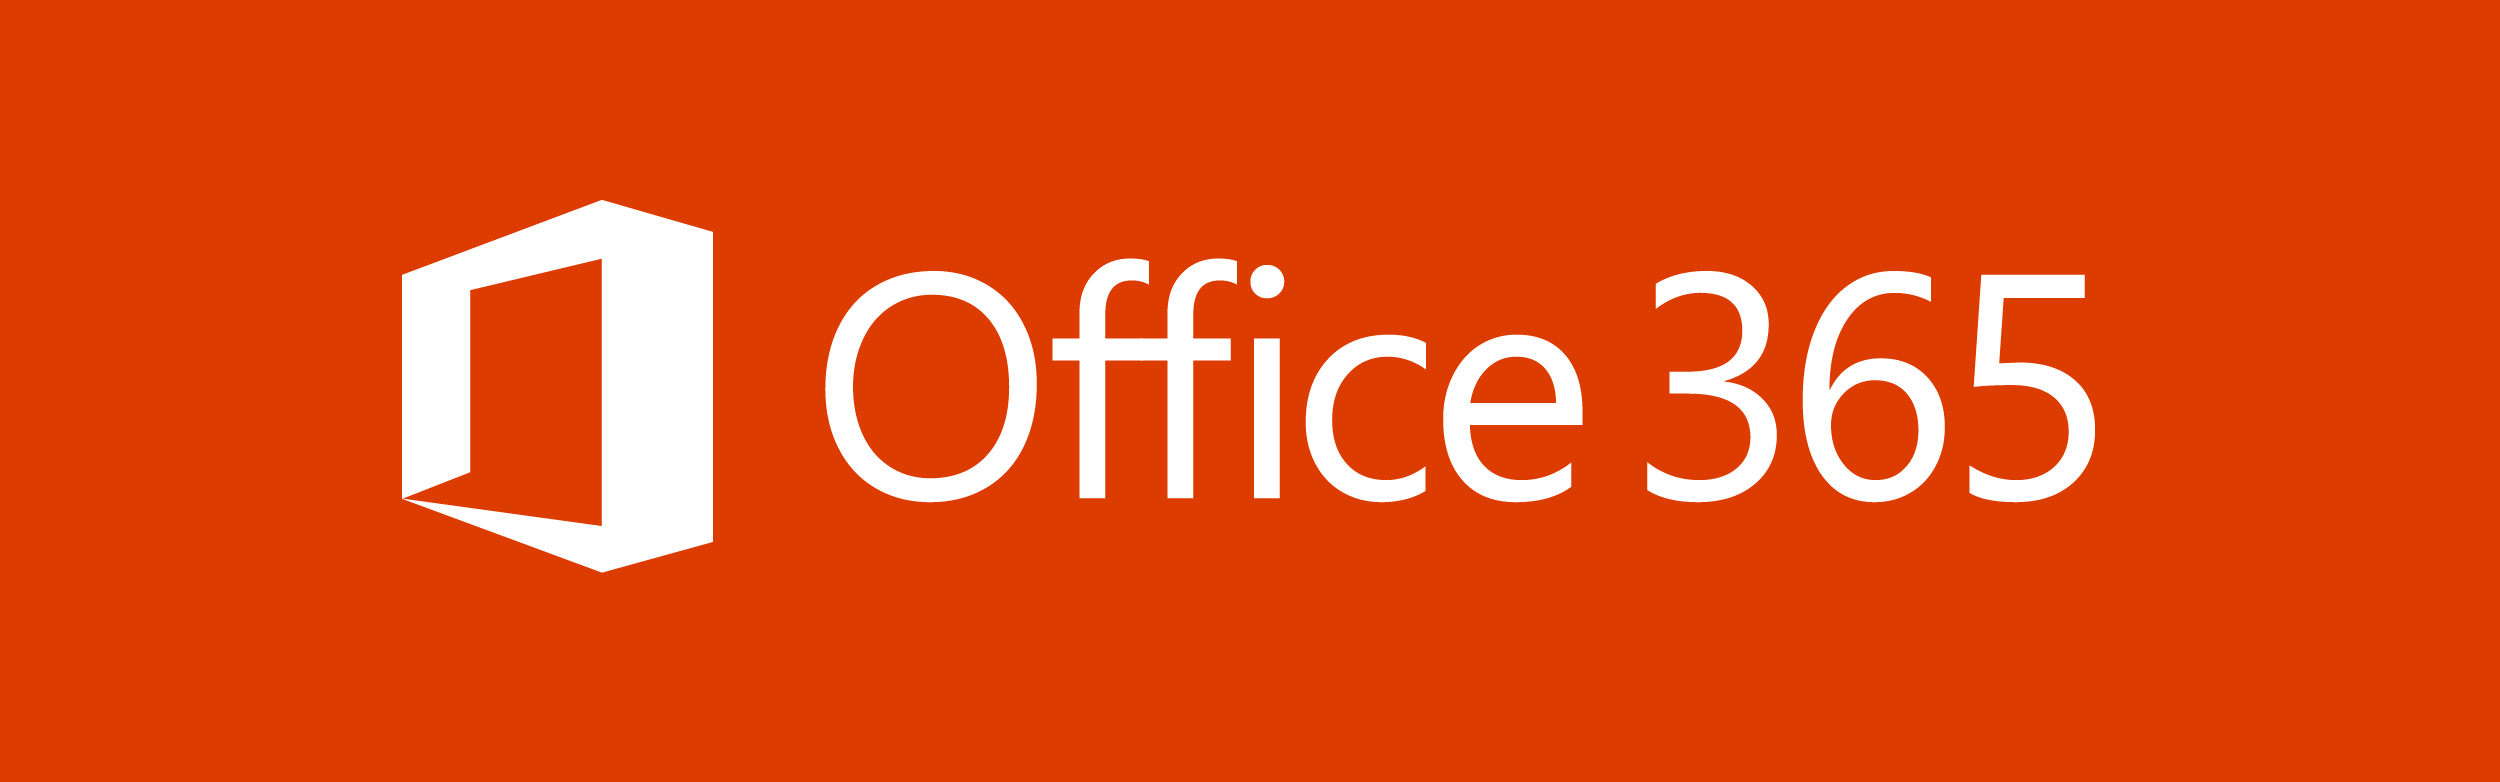 office365banner-01.png?x49248